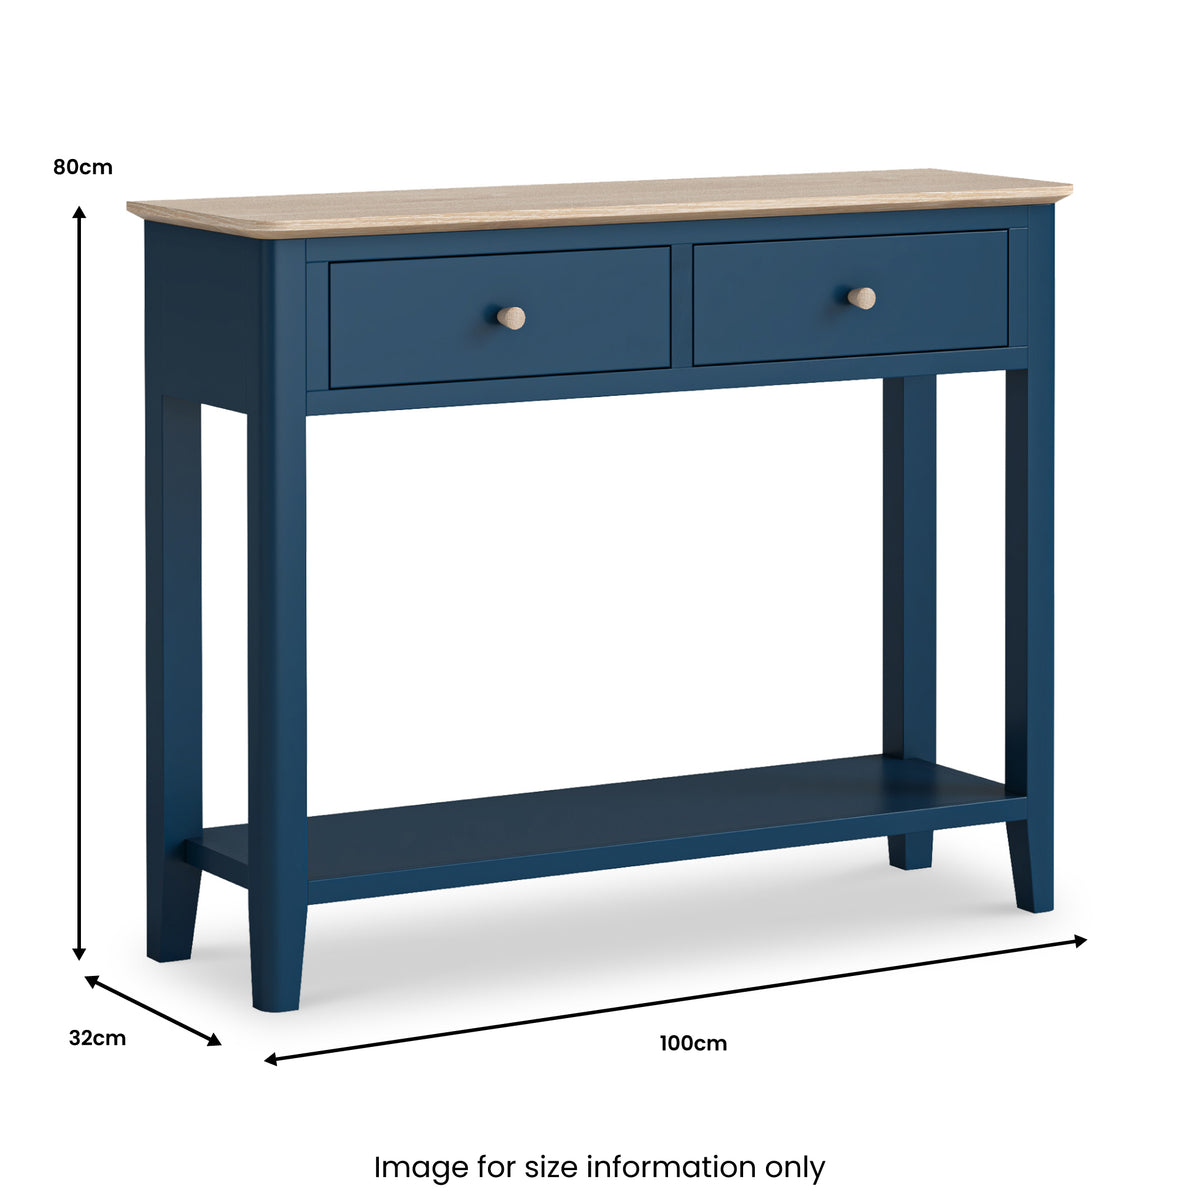 Penrose Console Table Dimensions